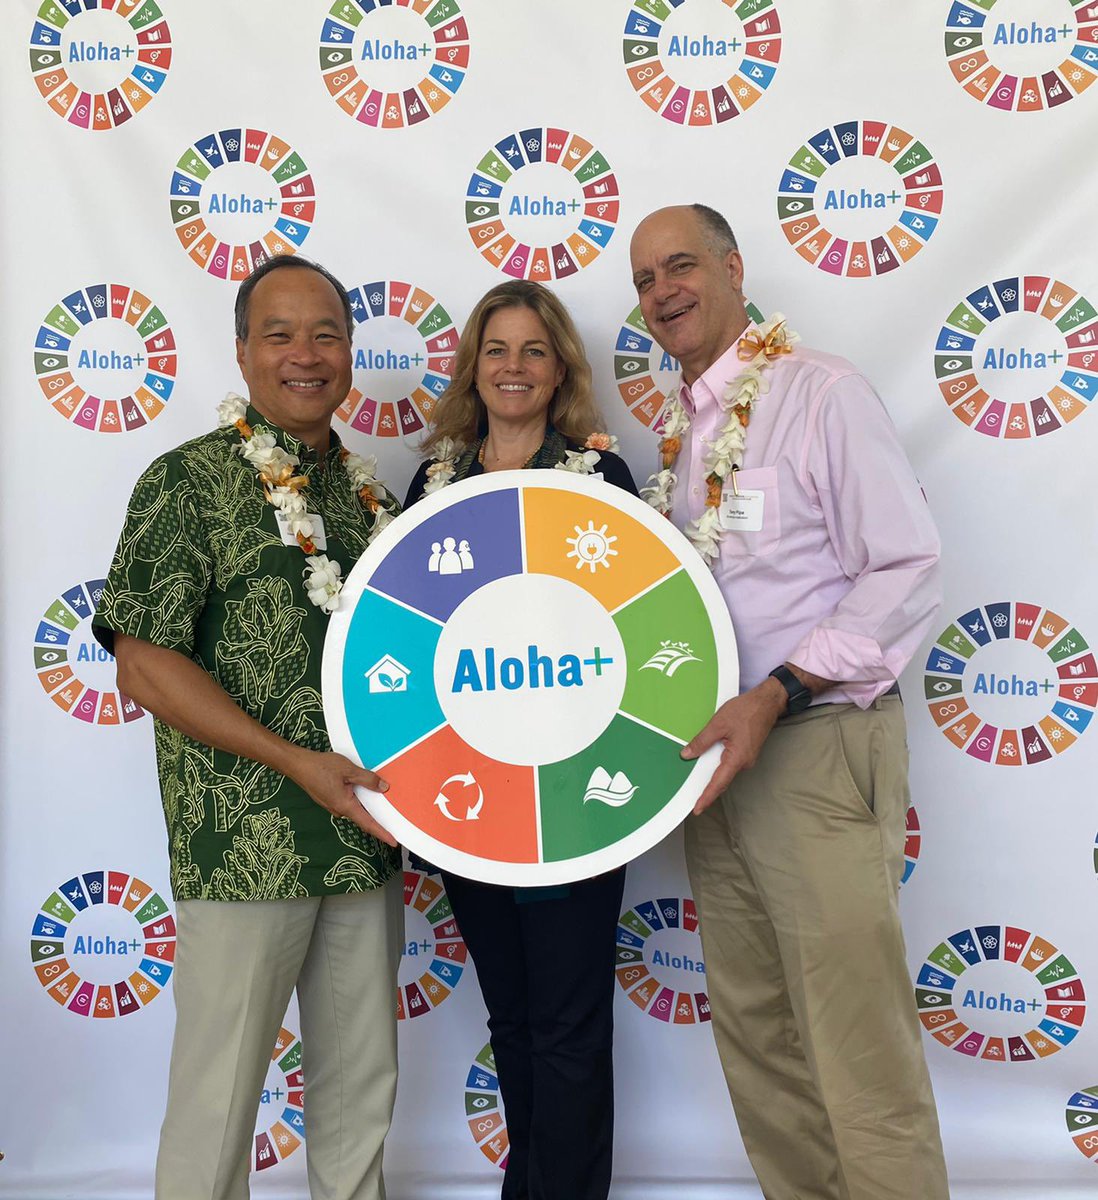 We’re honored to celebrate 11 years of Hawai’i Green Growth - a @UN recognized Local2030 hub - at today’s Annual Partnership Event. @HIGreenGrowth and our island partners serves a model for how we bring climate diplomacy outside of national capitals. #IslandLeadership #SDGs